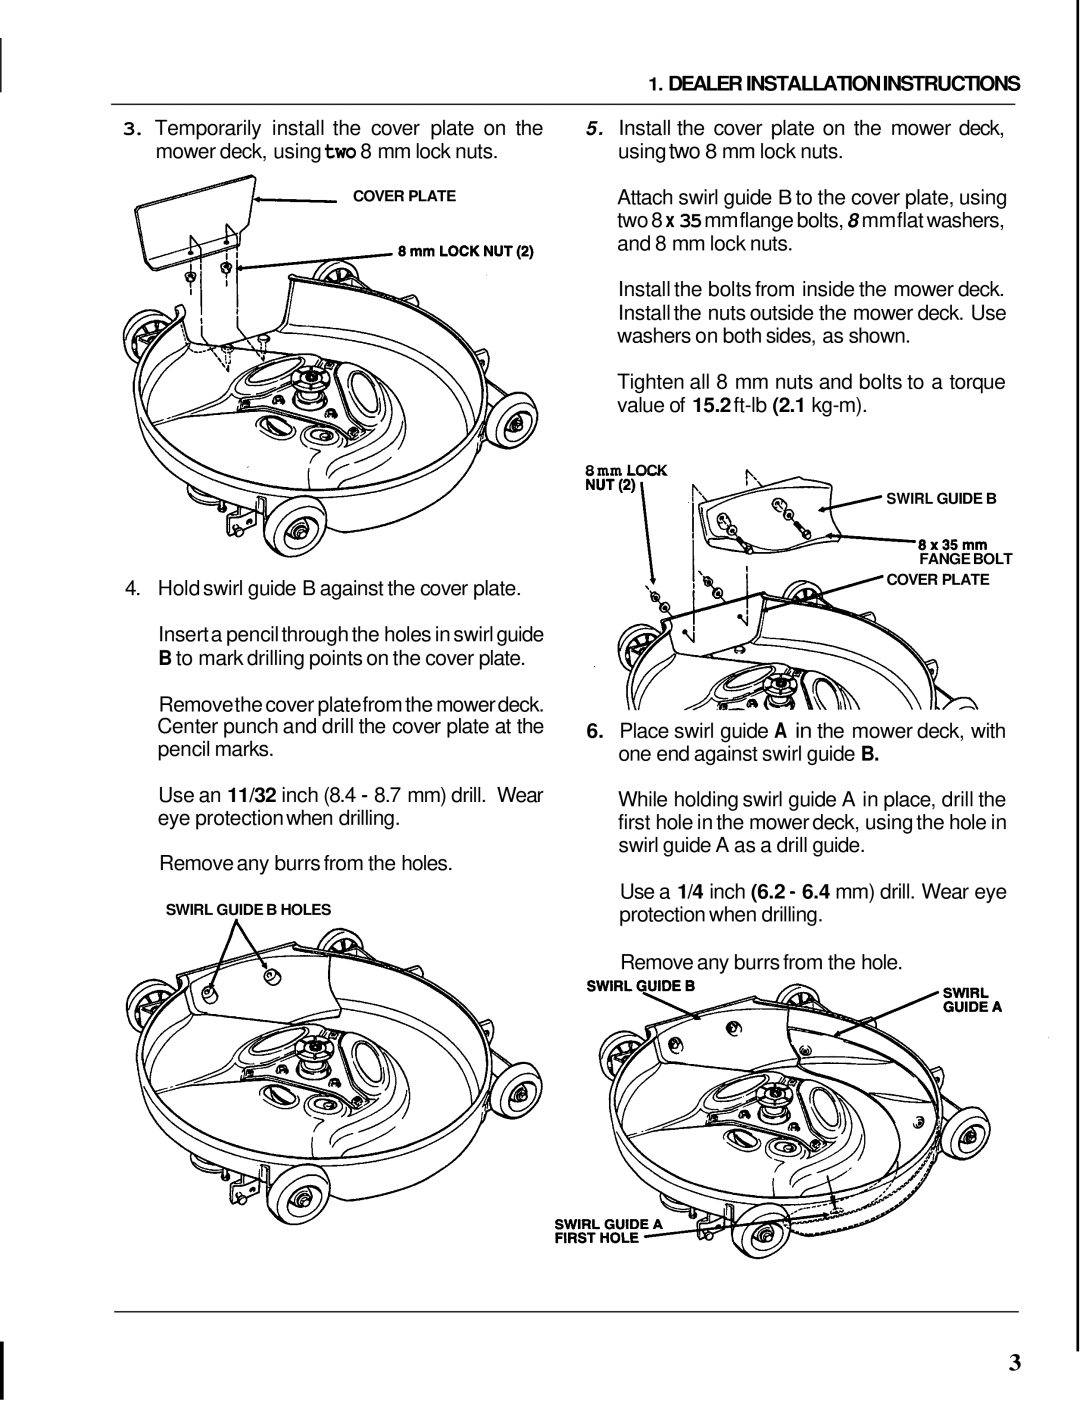 Honda Power Equipment H3000, H1000 manual Dealer Installationinstructions, Hold swirl guide B against the cover plate 